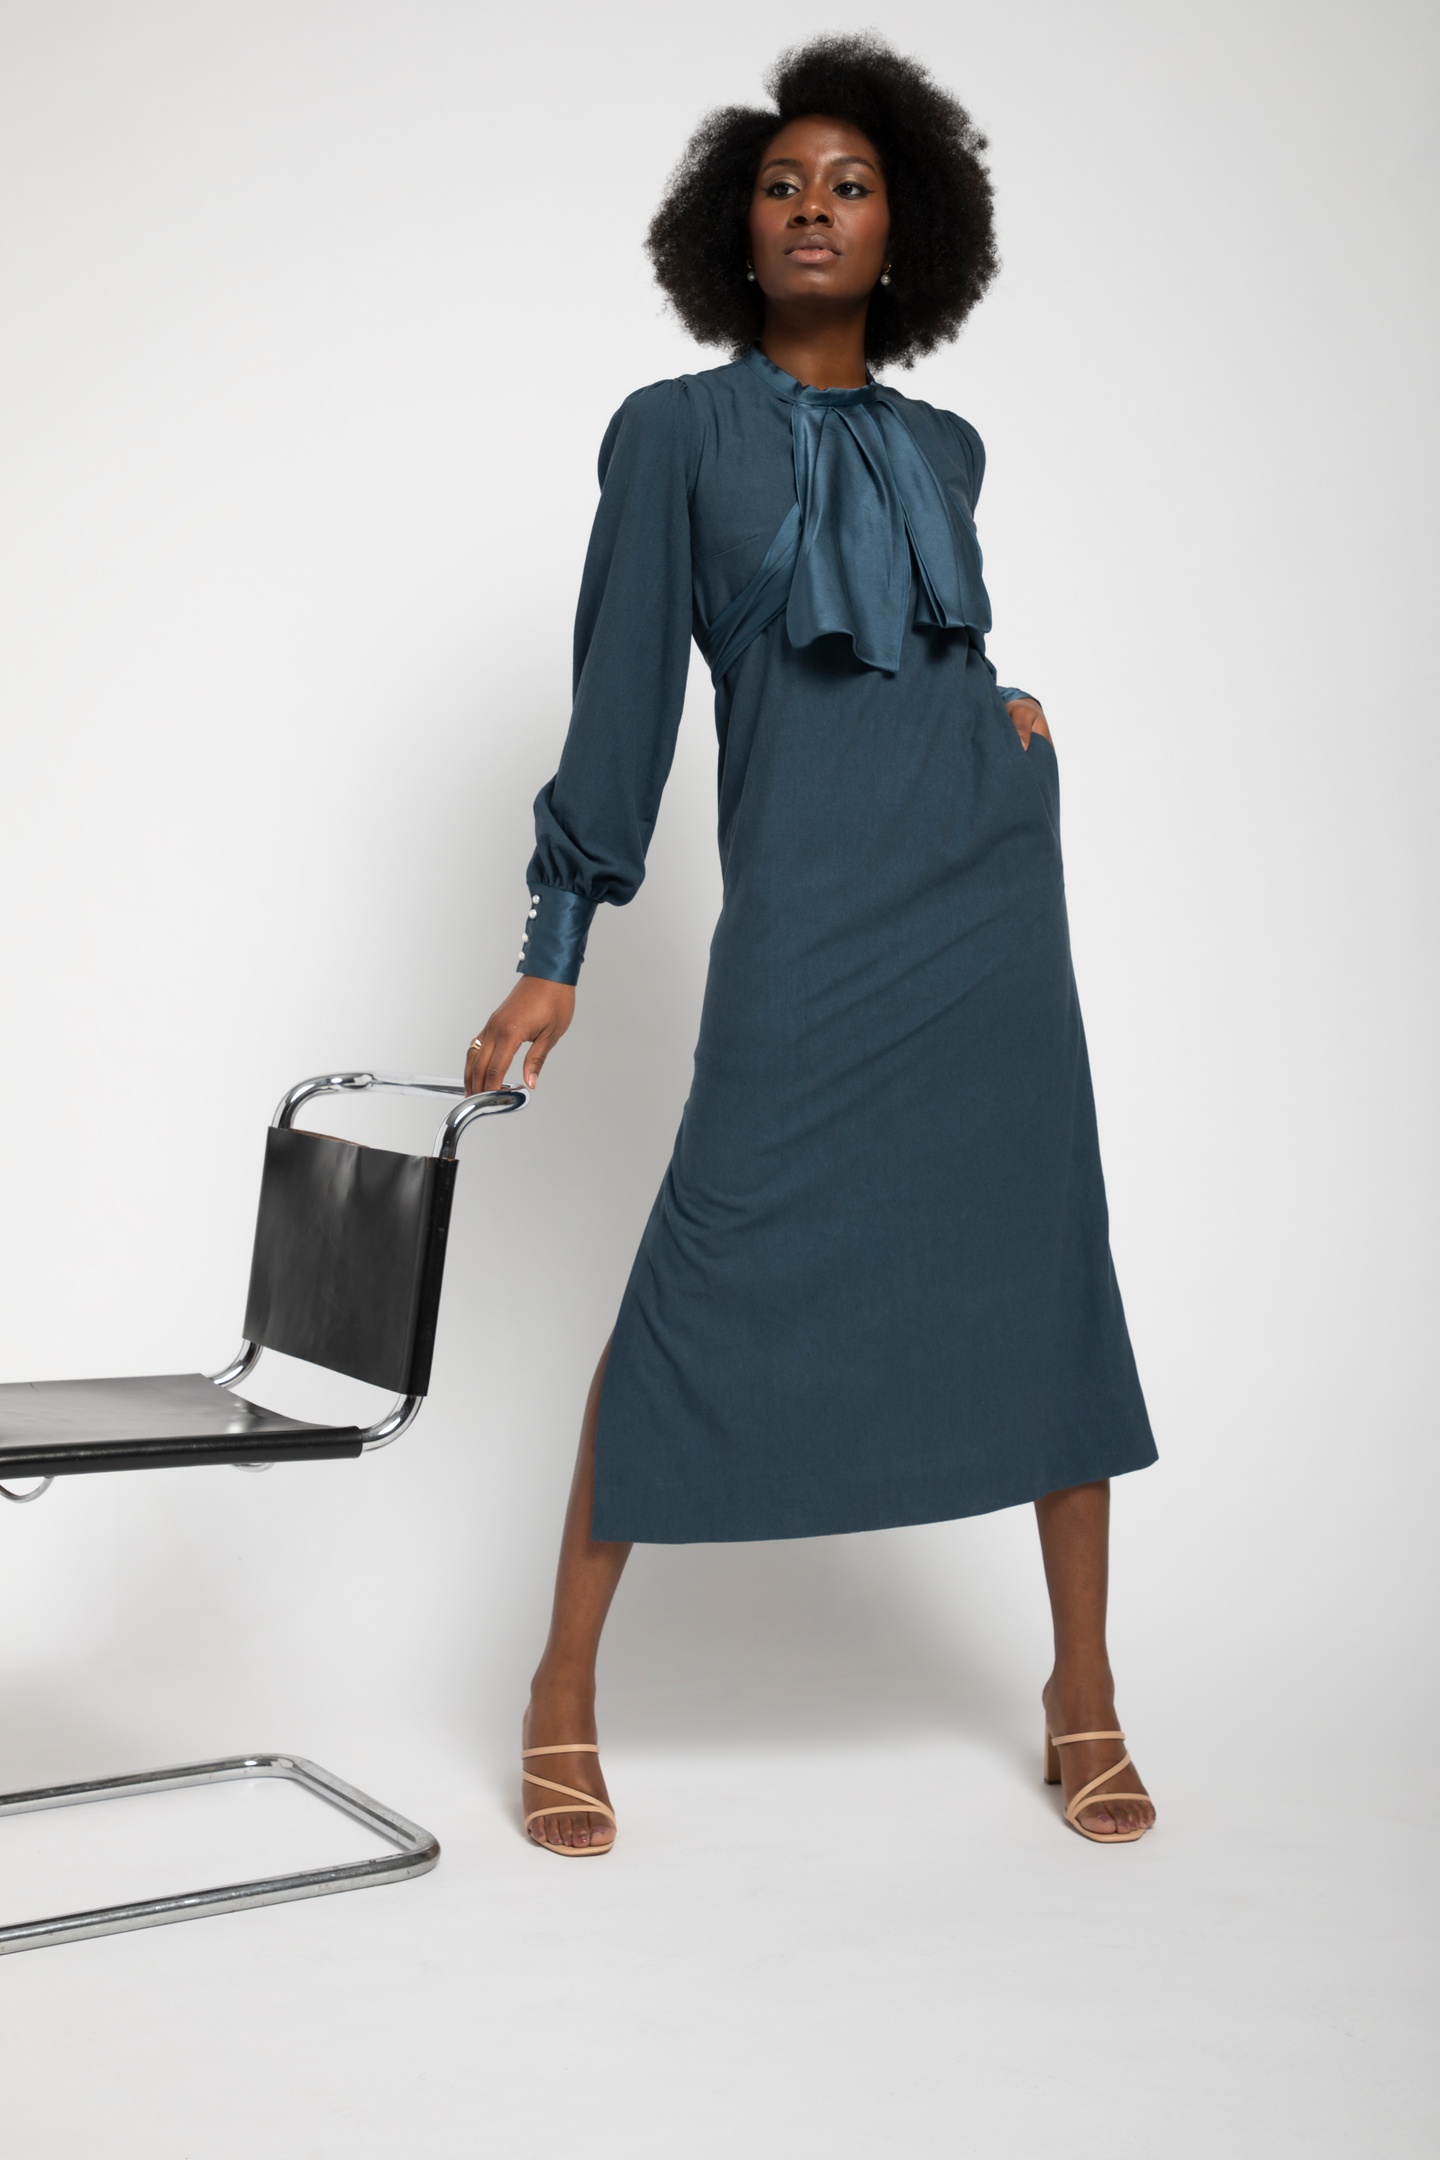 Model in a dark teal dress with long sleeves with a narrow satin cuff and a satin cravat collar. Model poses with a midcentury modern conference room chair.